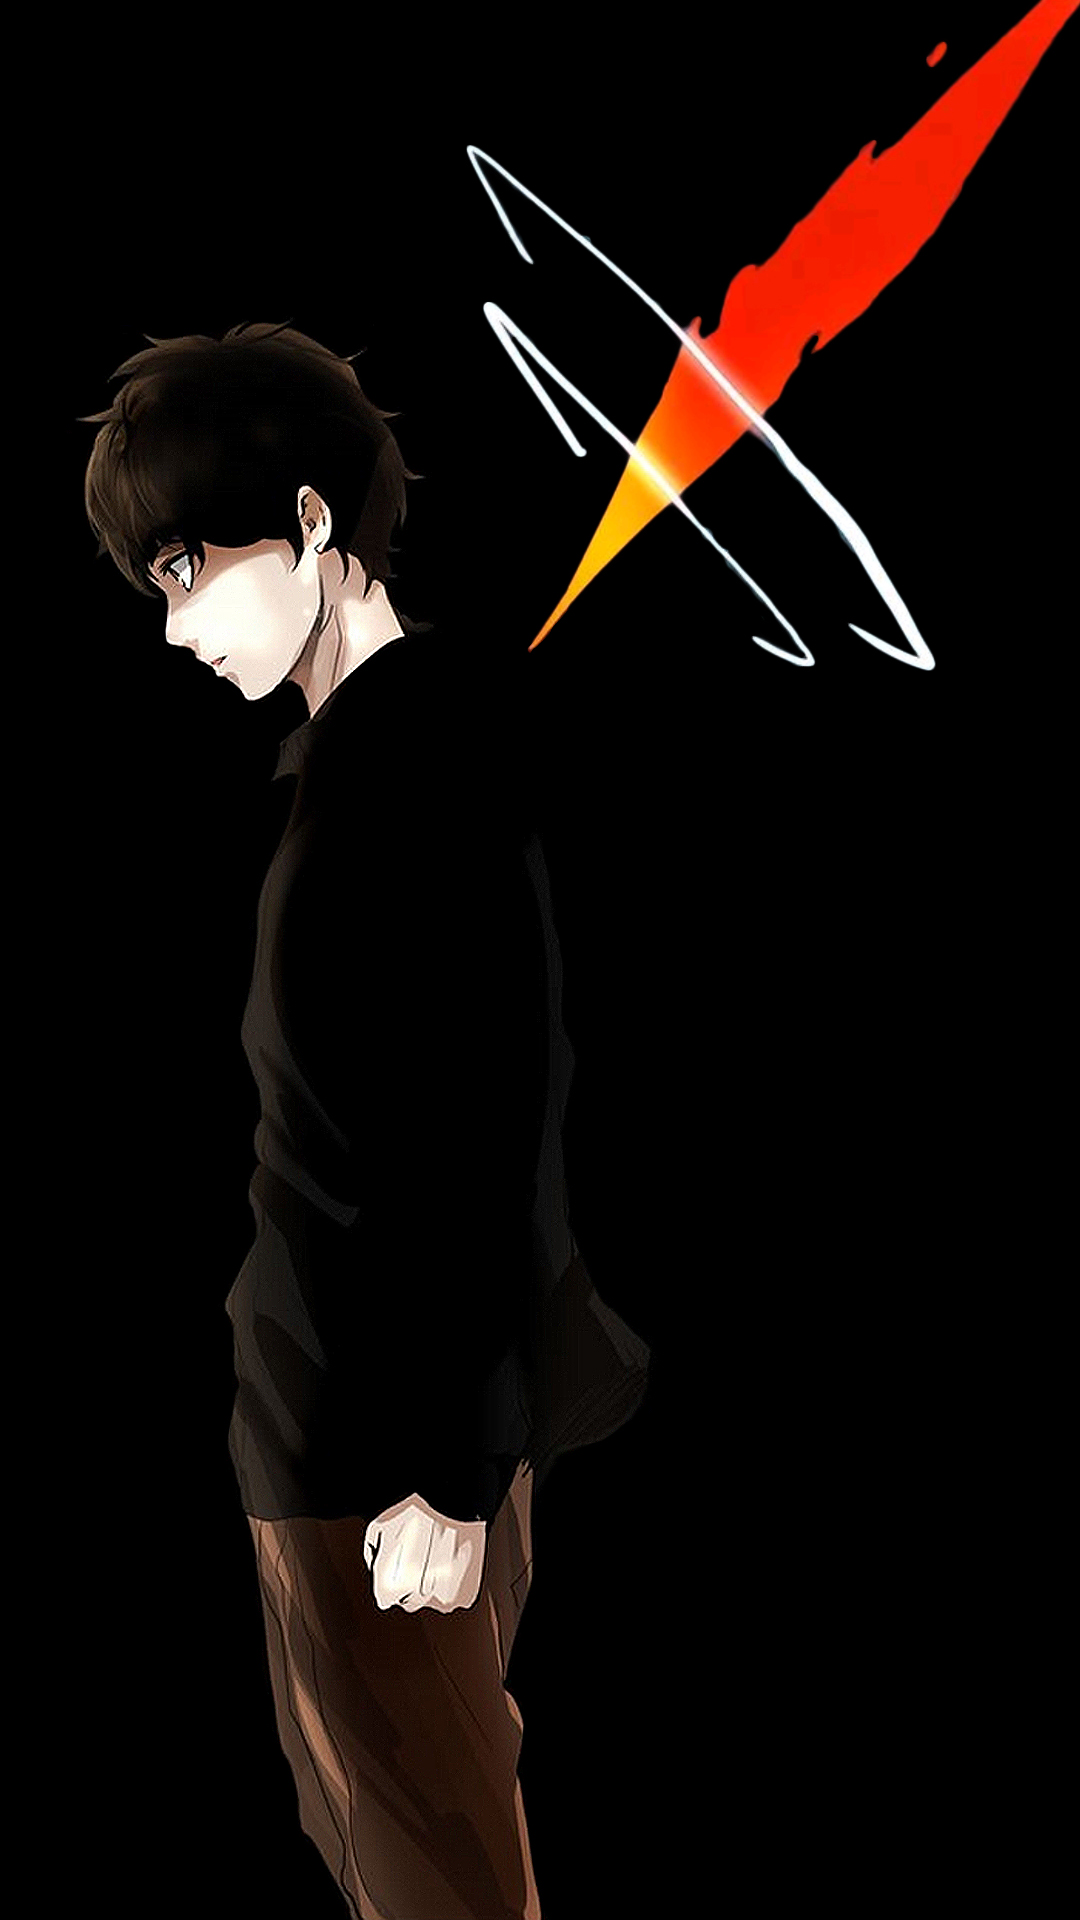 baam (tower of god), tower of god, anime